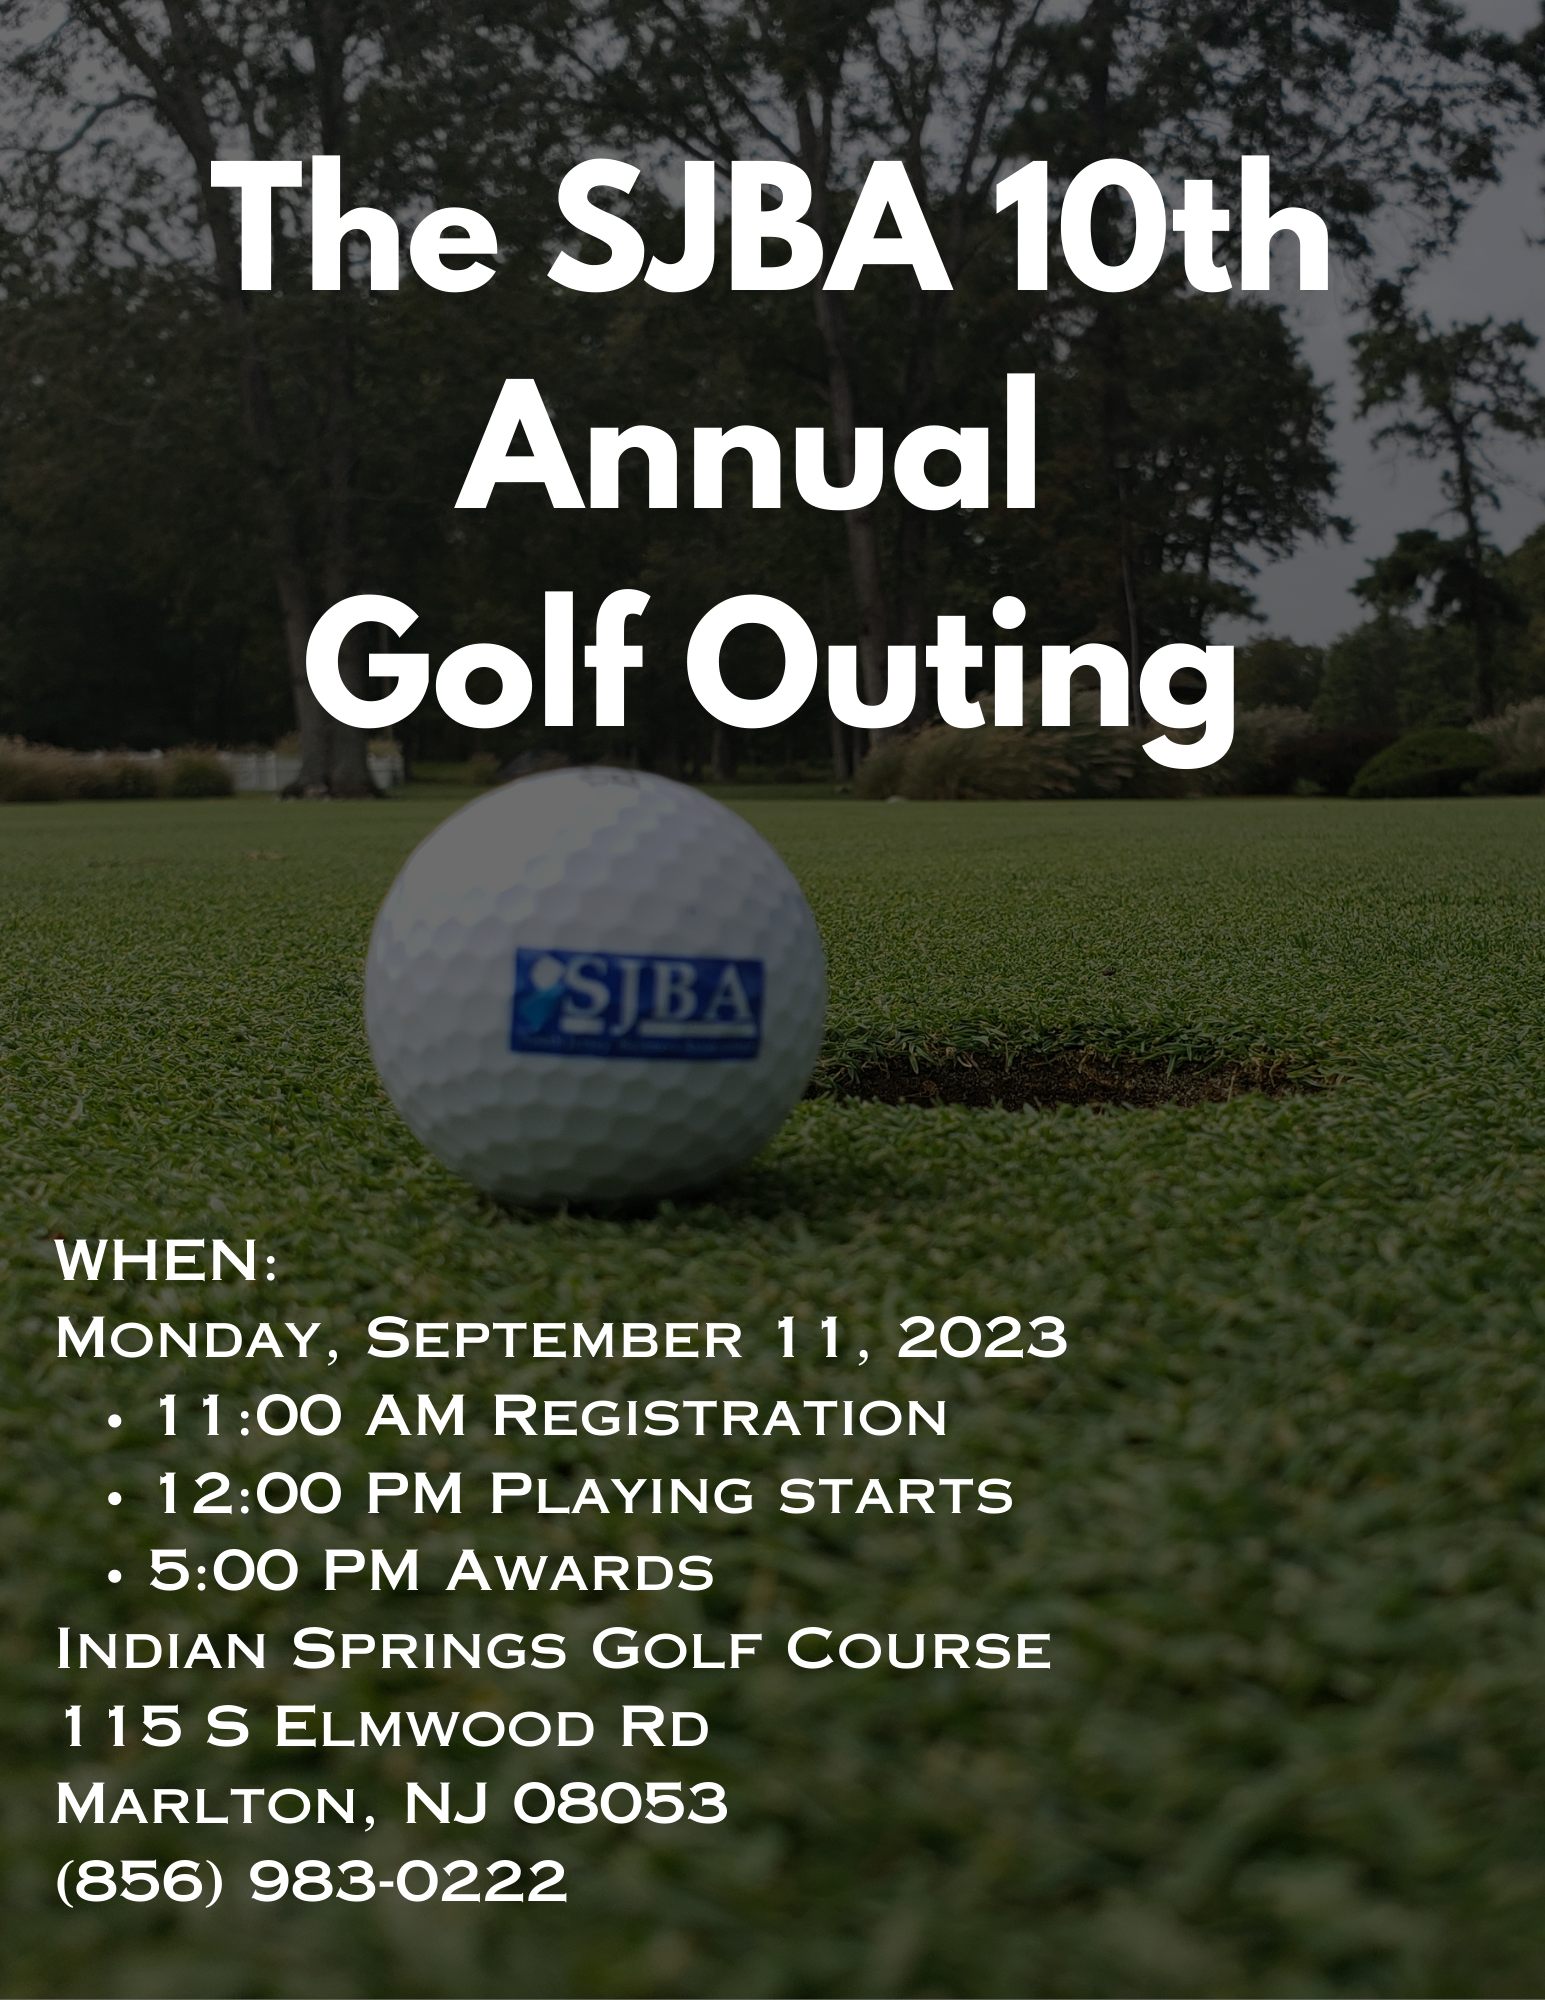 The SJBA 10th Annual Golf Outing